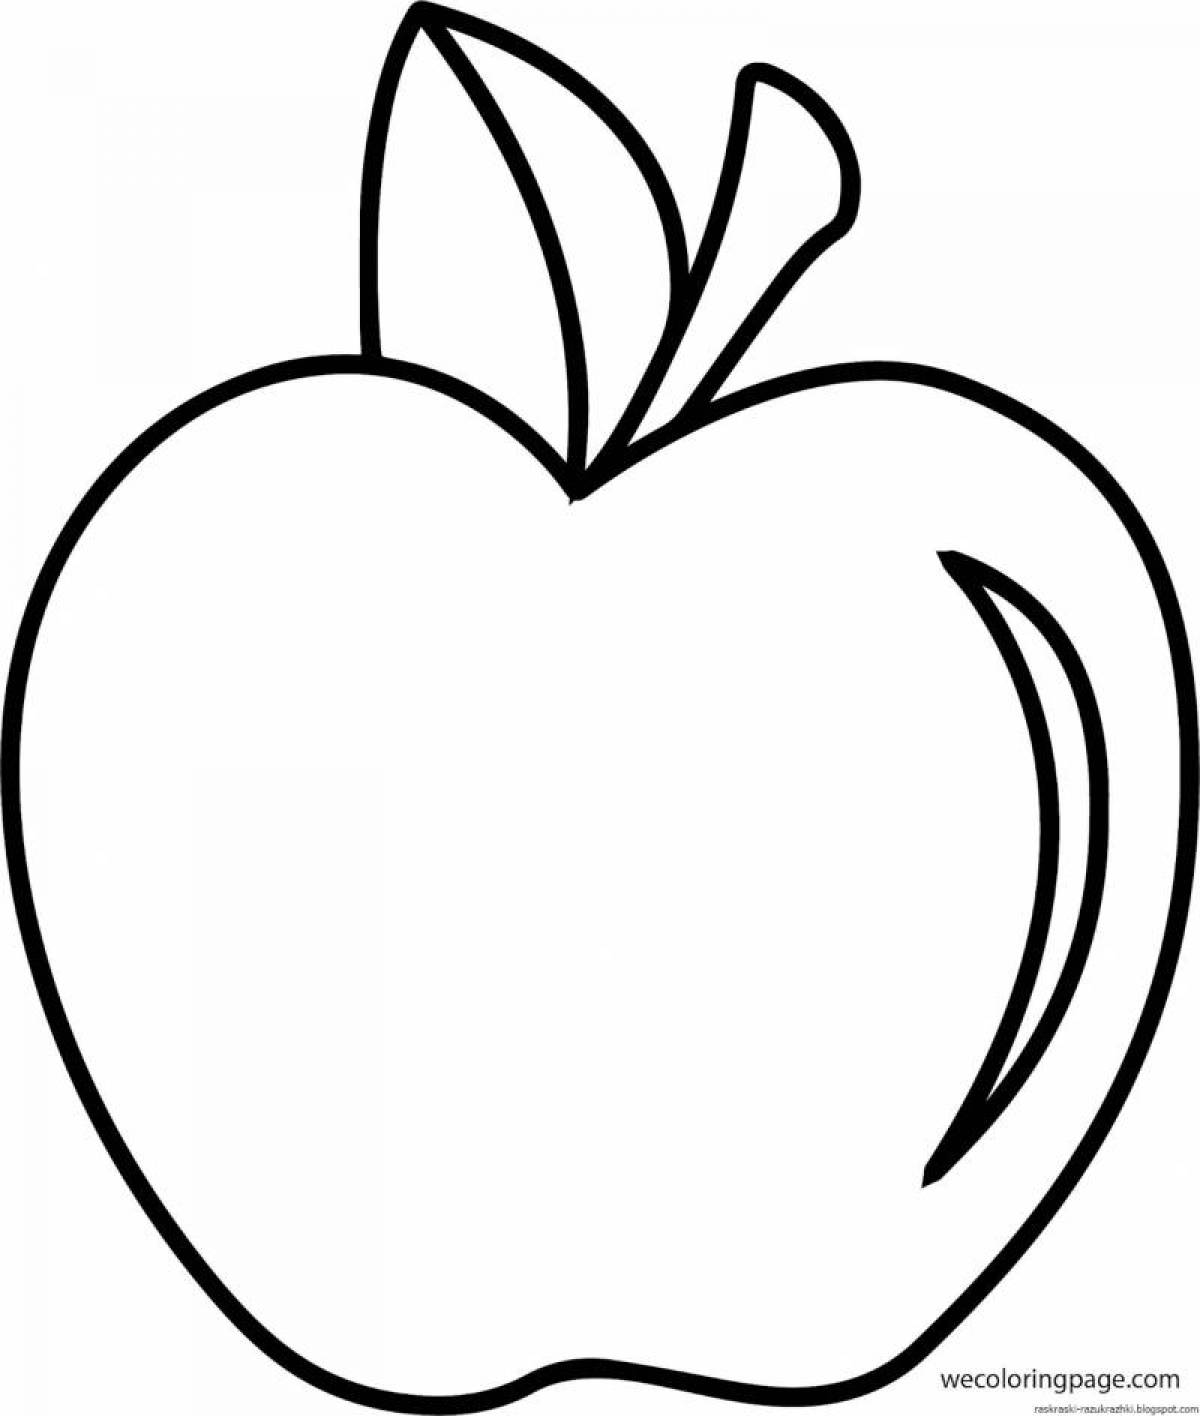 Colorful apple coloring book